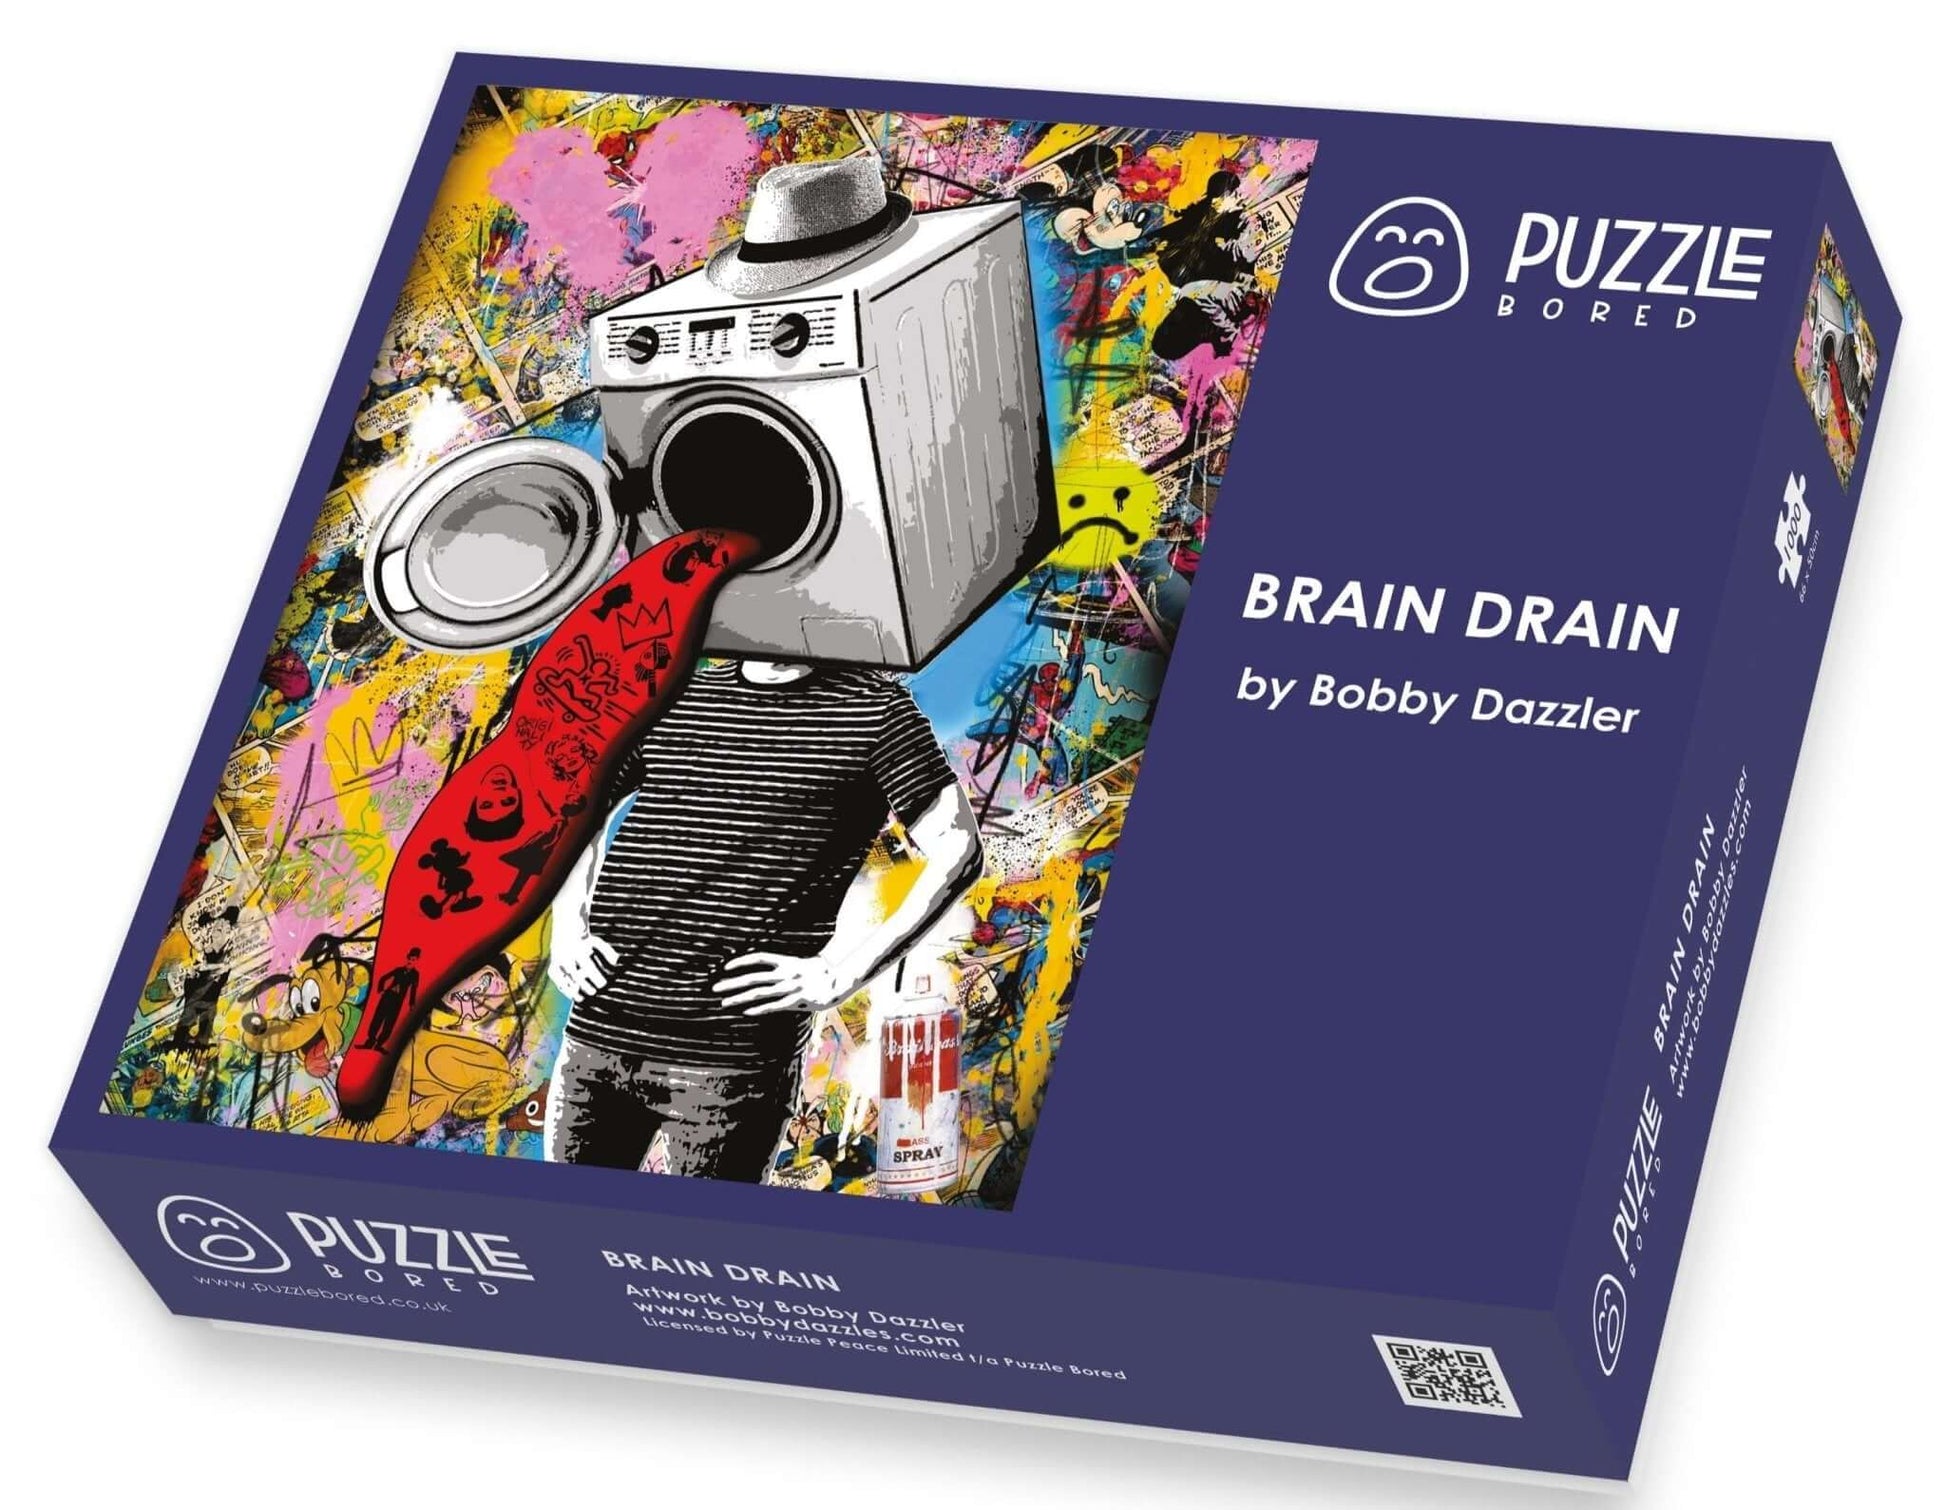 Brain Drain by Bobby Dazzler - Puzzle Bored